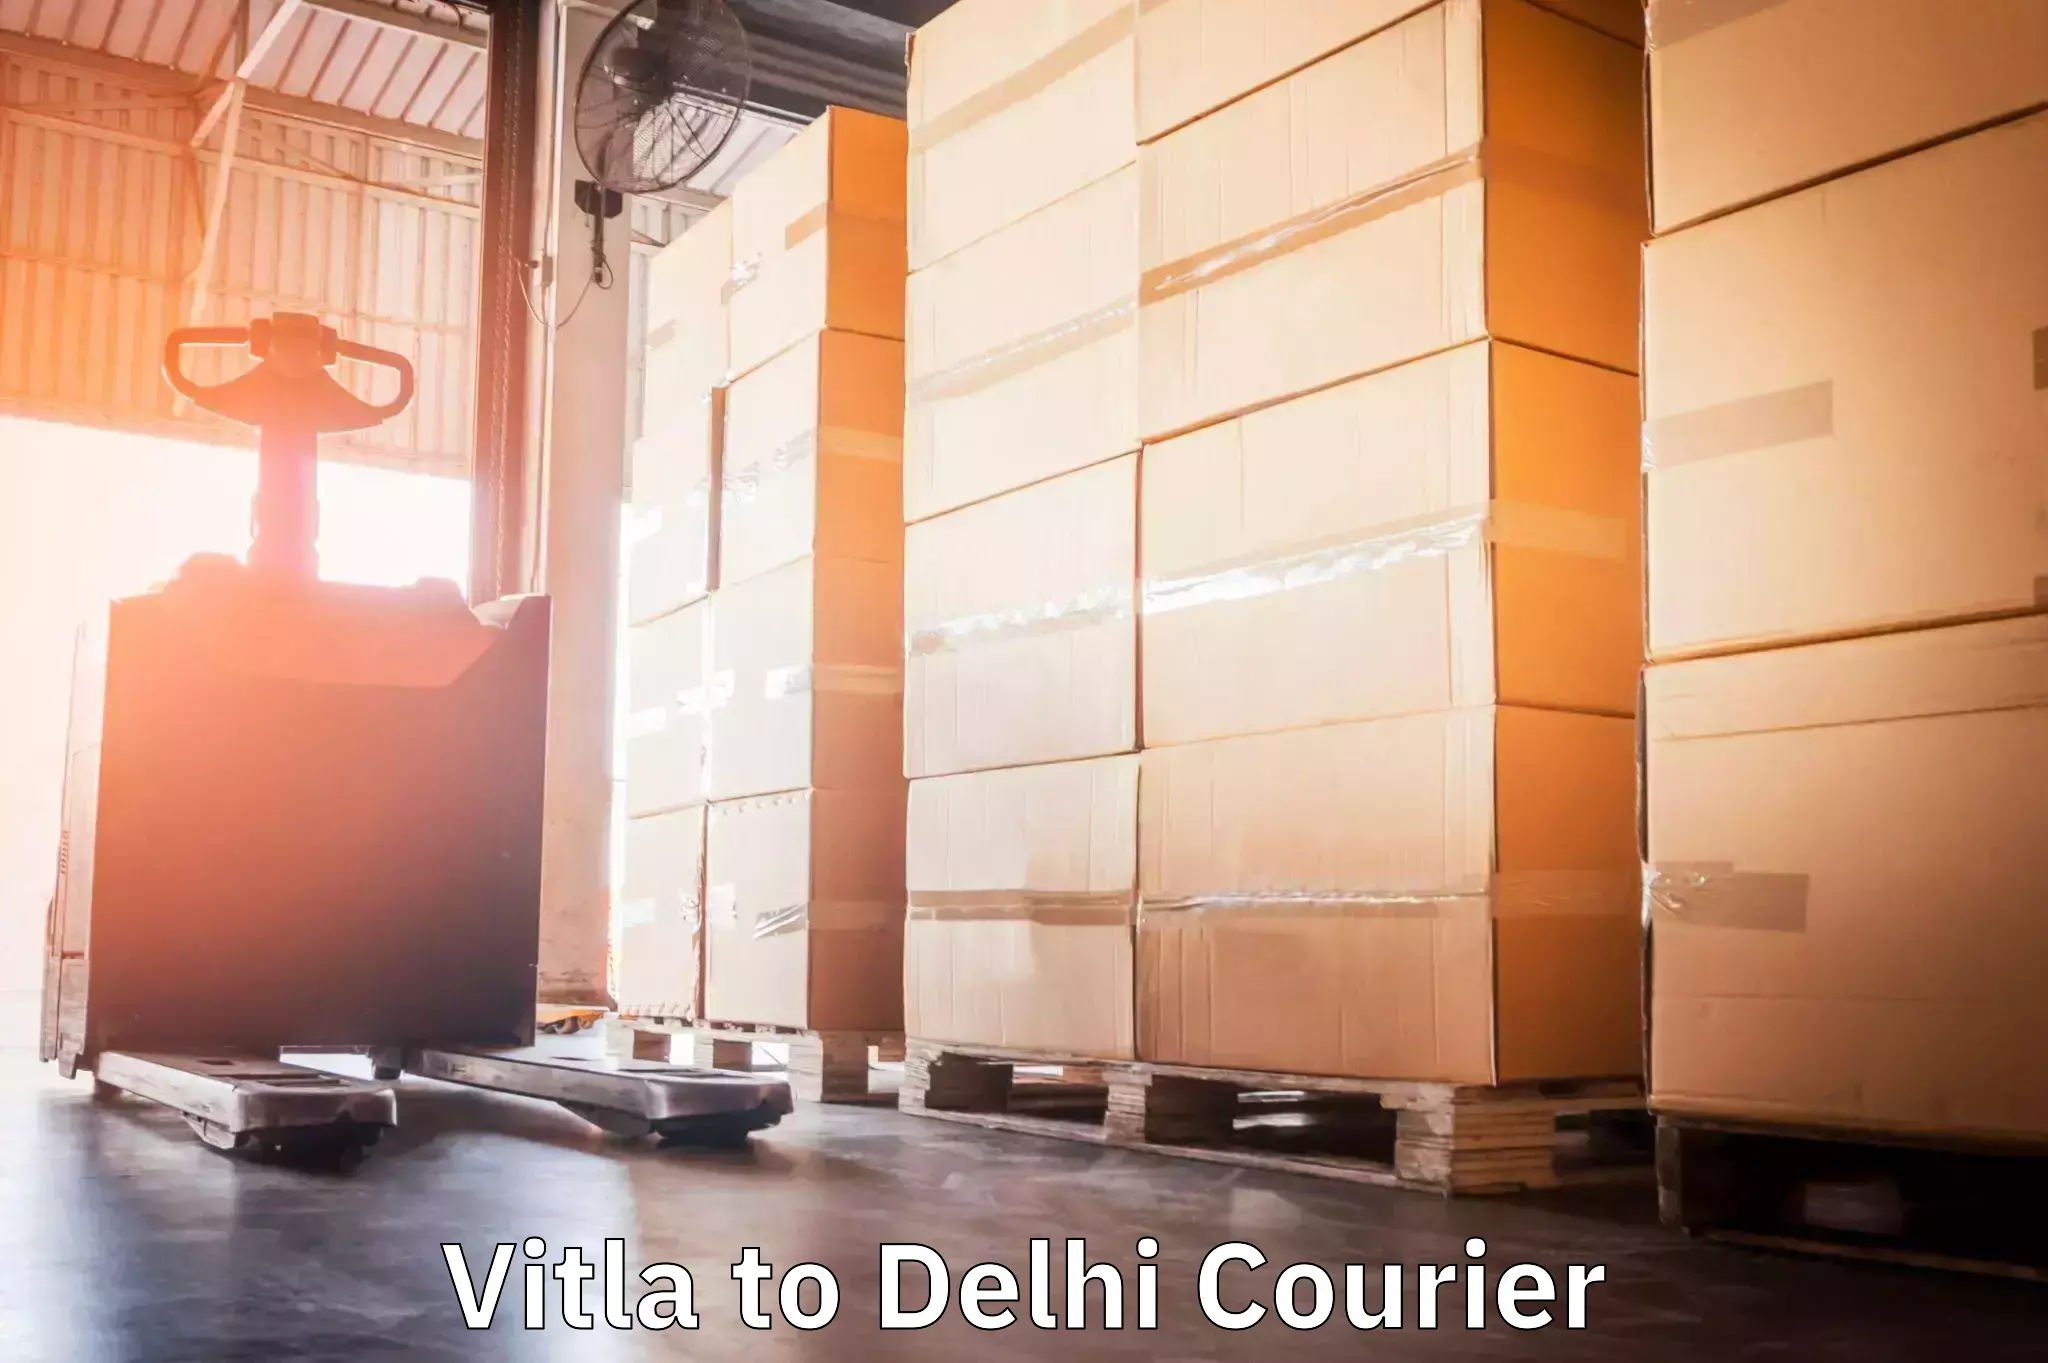 Tailored shipping plans Vitla to Lodhi Road